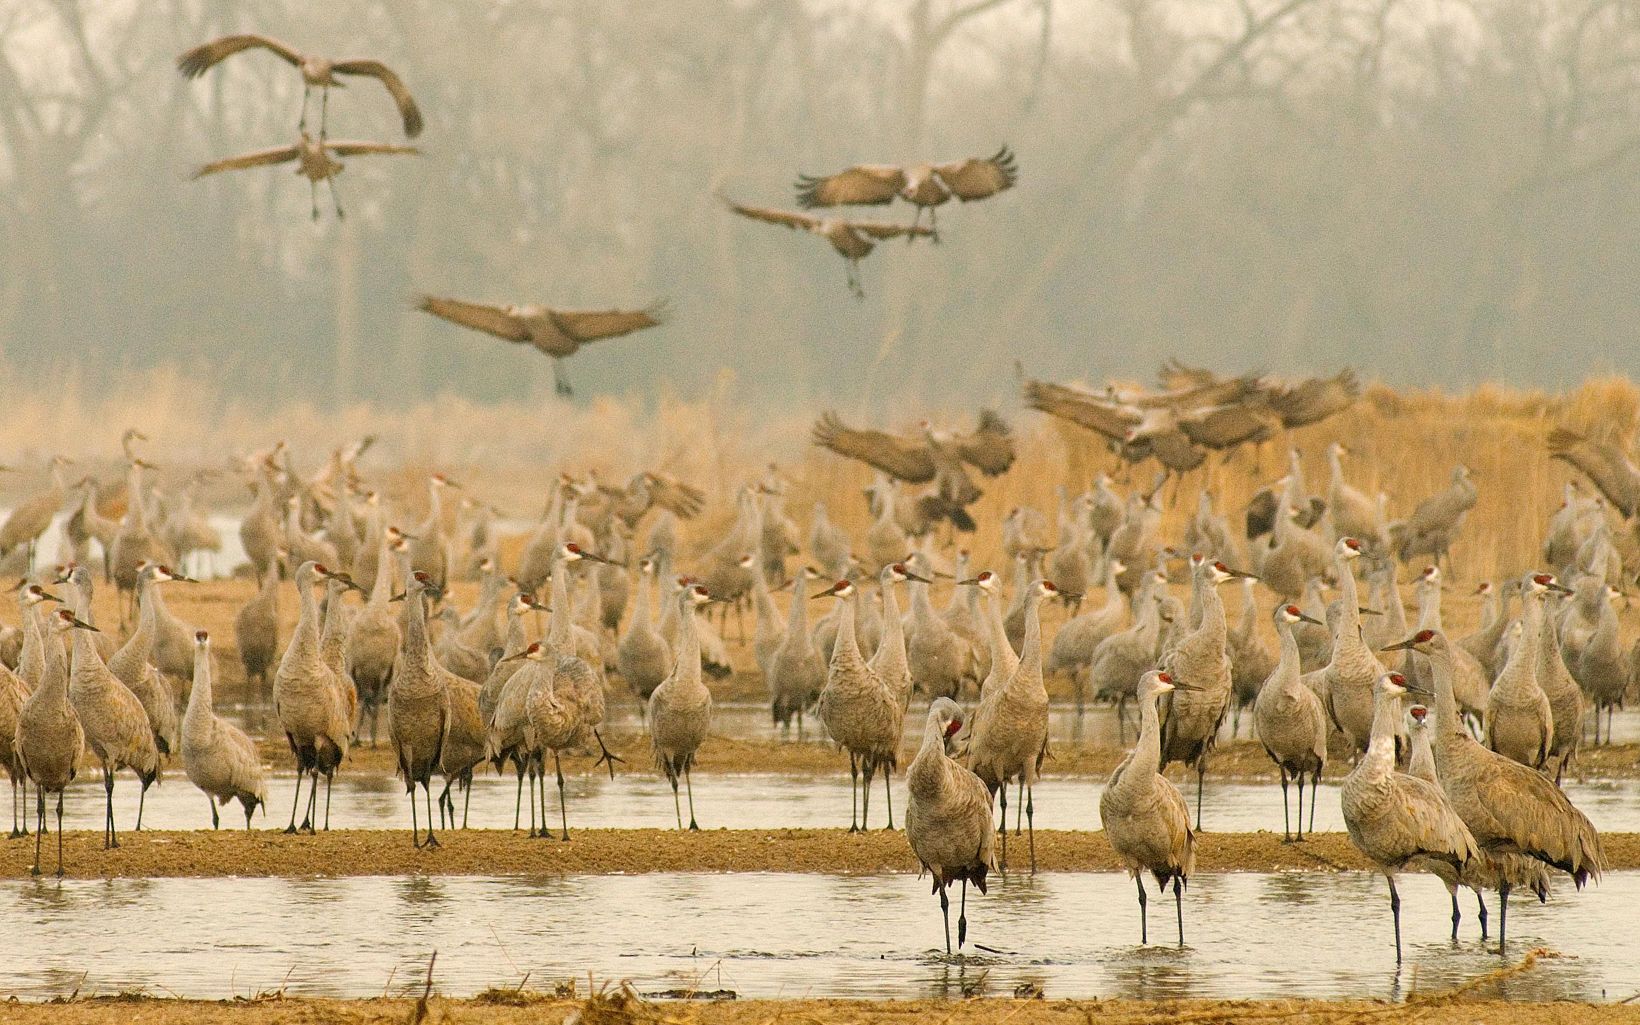 Dozens of sandhill cranes gather on the shores of the Platte River.